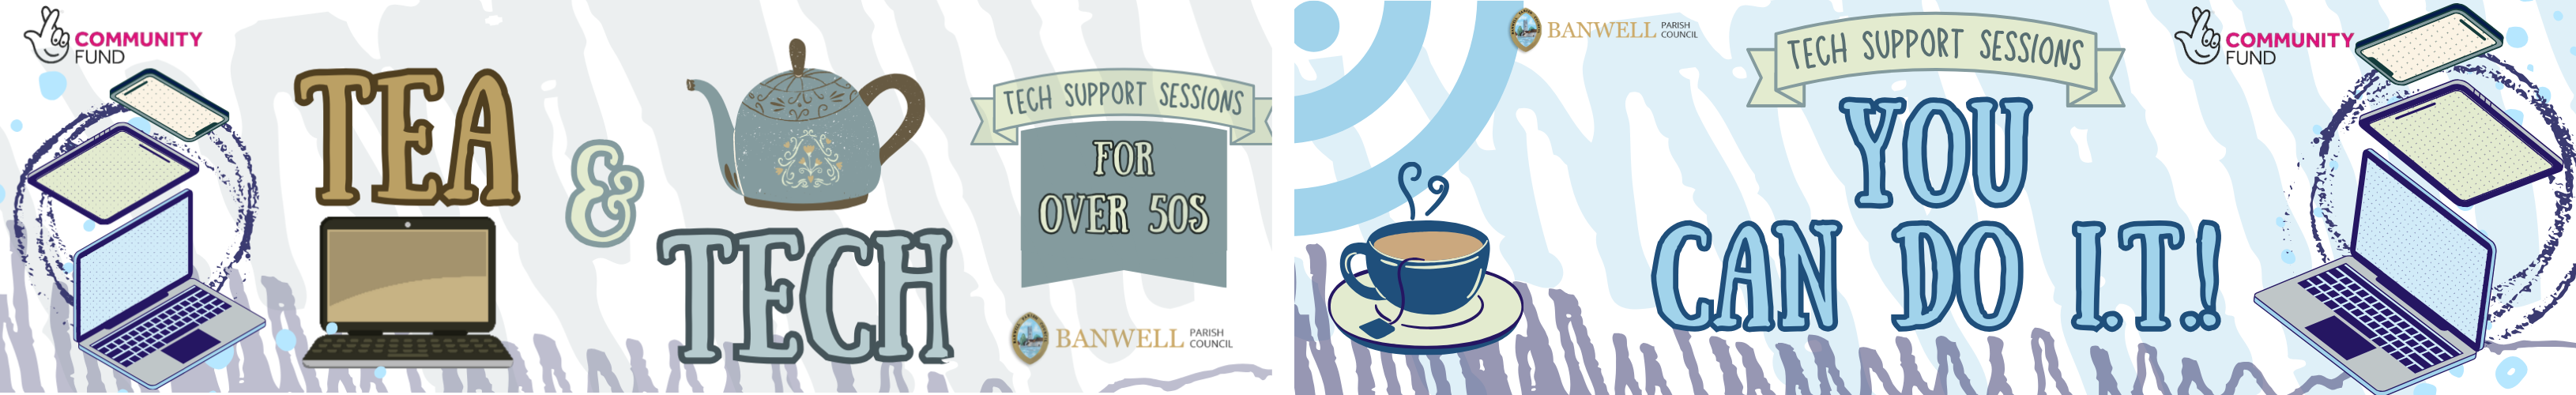 Tea & Tech: Tech support for over 50s. Banwell Parish Council Logo. National Lottery Community Fund logo. Tech Support Sessions: You Can Do I.T! Banwell Parish Council Logo. National Lottery Community Fund logo.